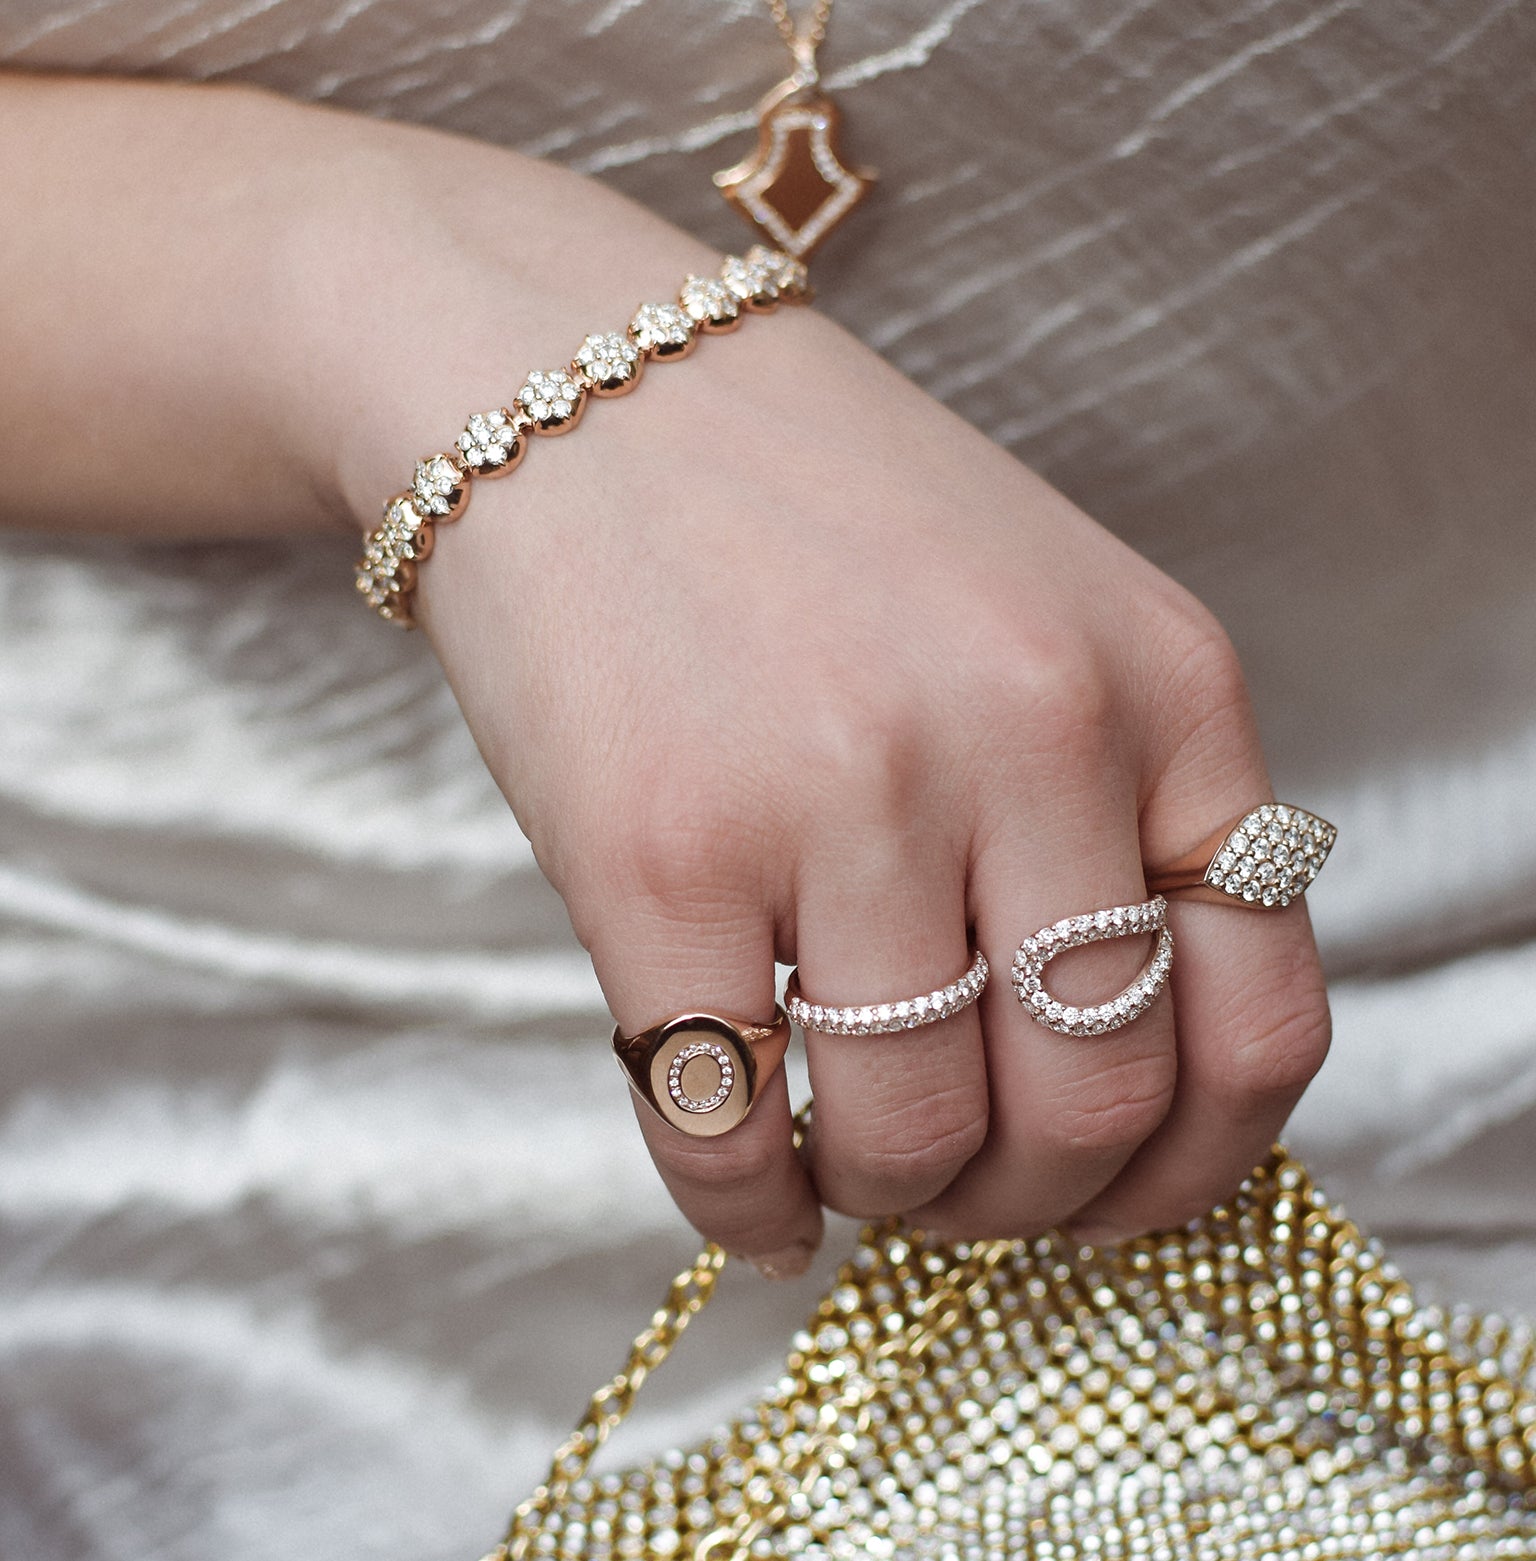 Mini Chilla Ring shown with the Arabesque Ring and Gemma Ring.